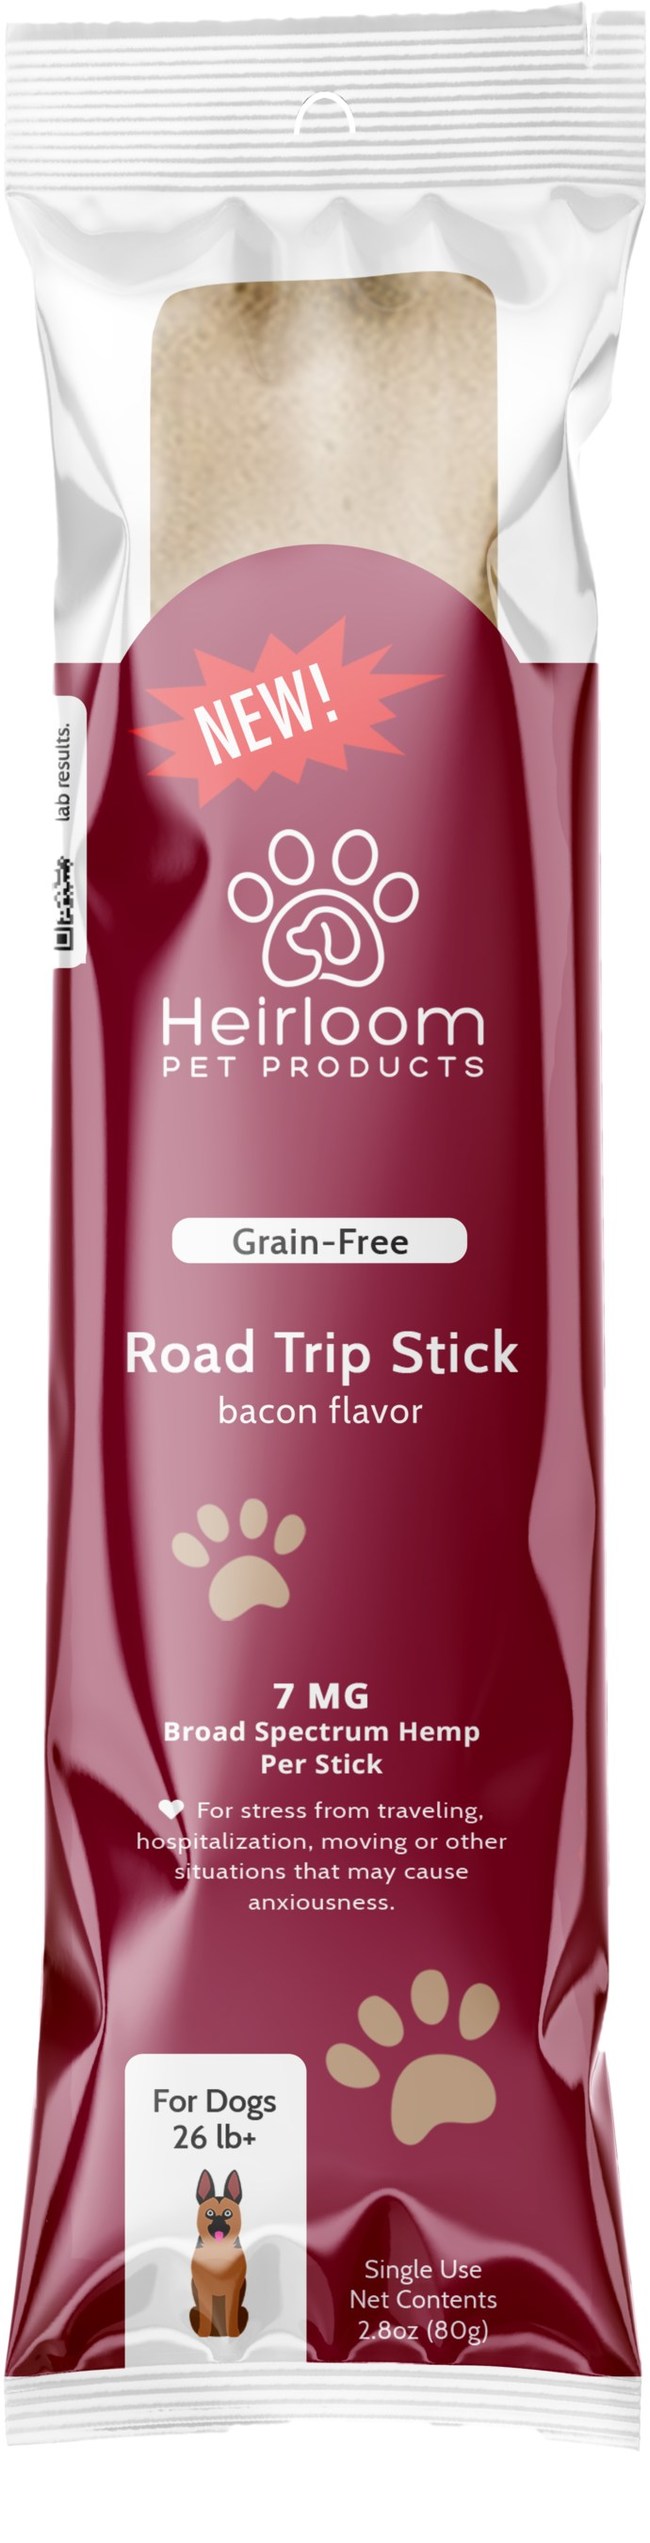 Road Trip Sticks from Heirloom Pet Products help manage occasional pet anxiety due to travel or situational stress.